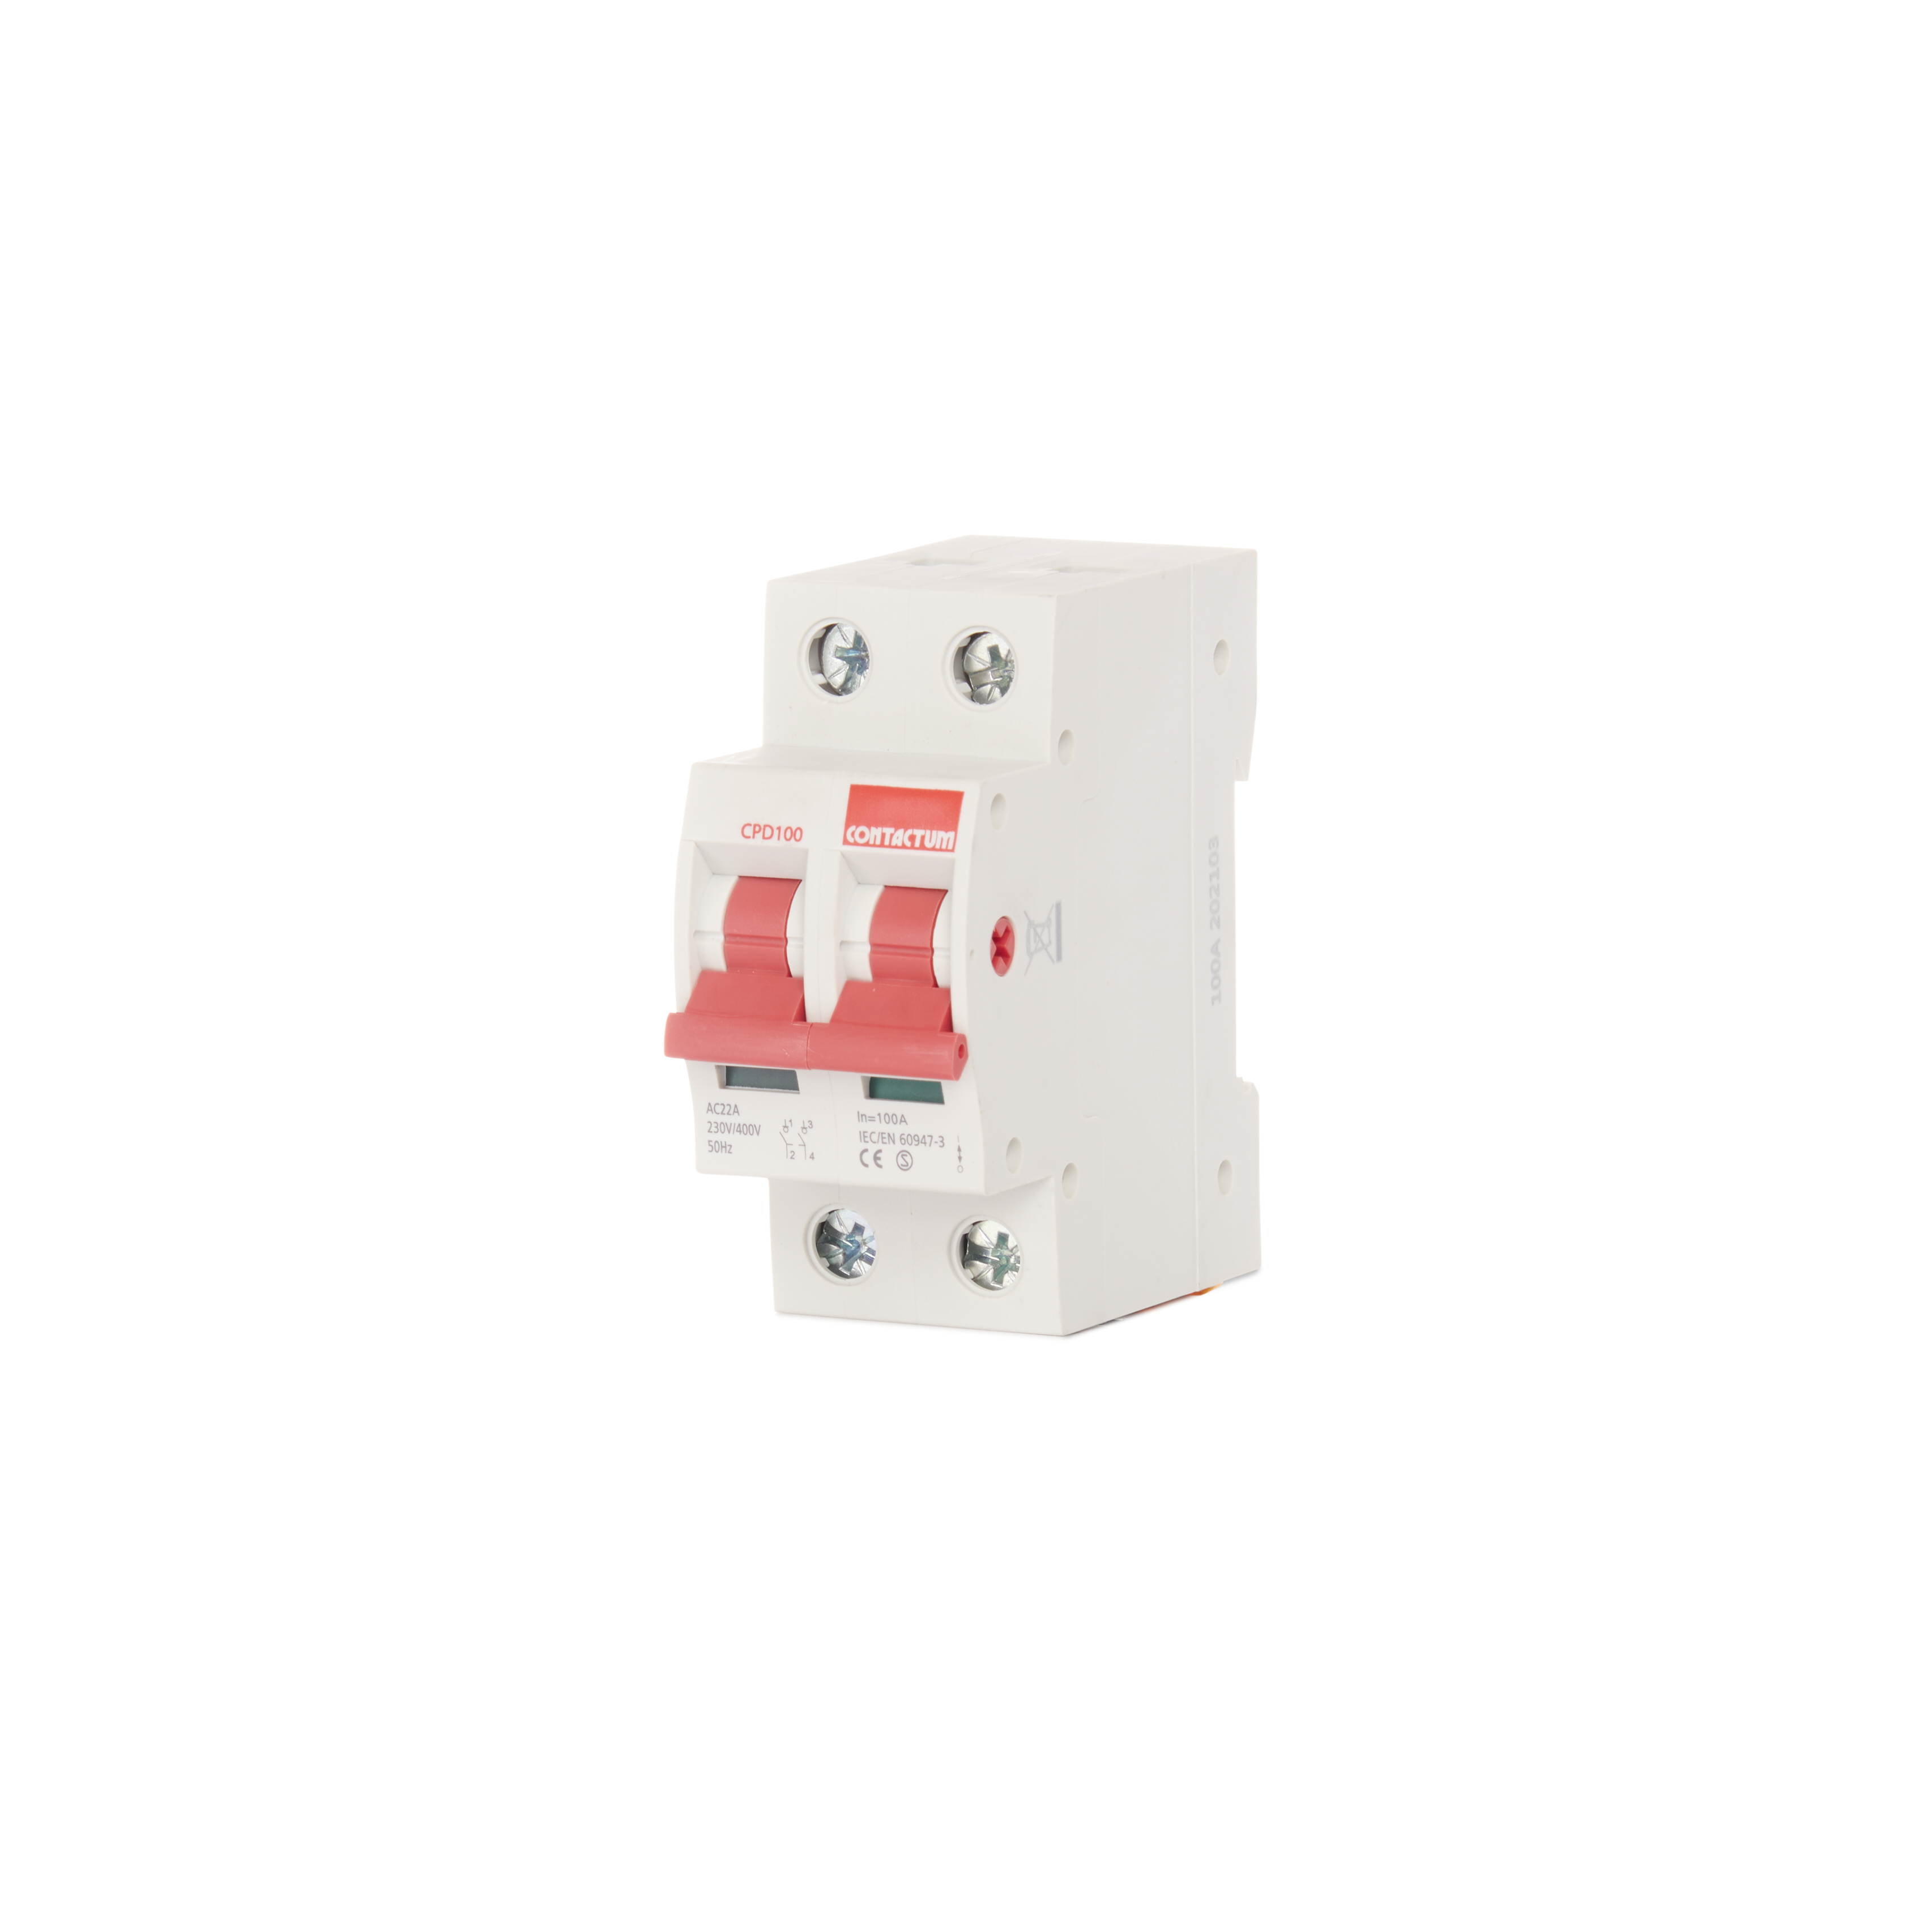 CONTACTUM 100 AMP DOUBLE POLE MAIN SWITCH DISCONNECTOR CPD100 